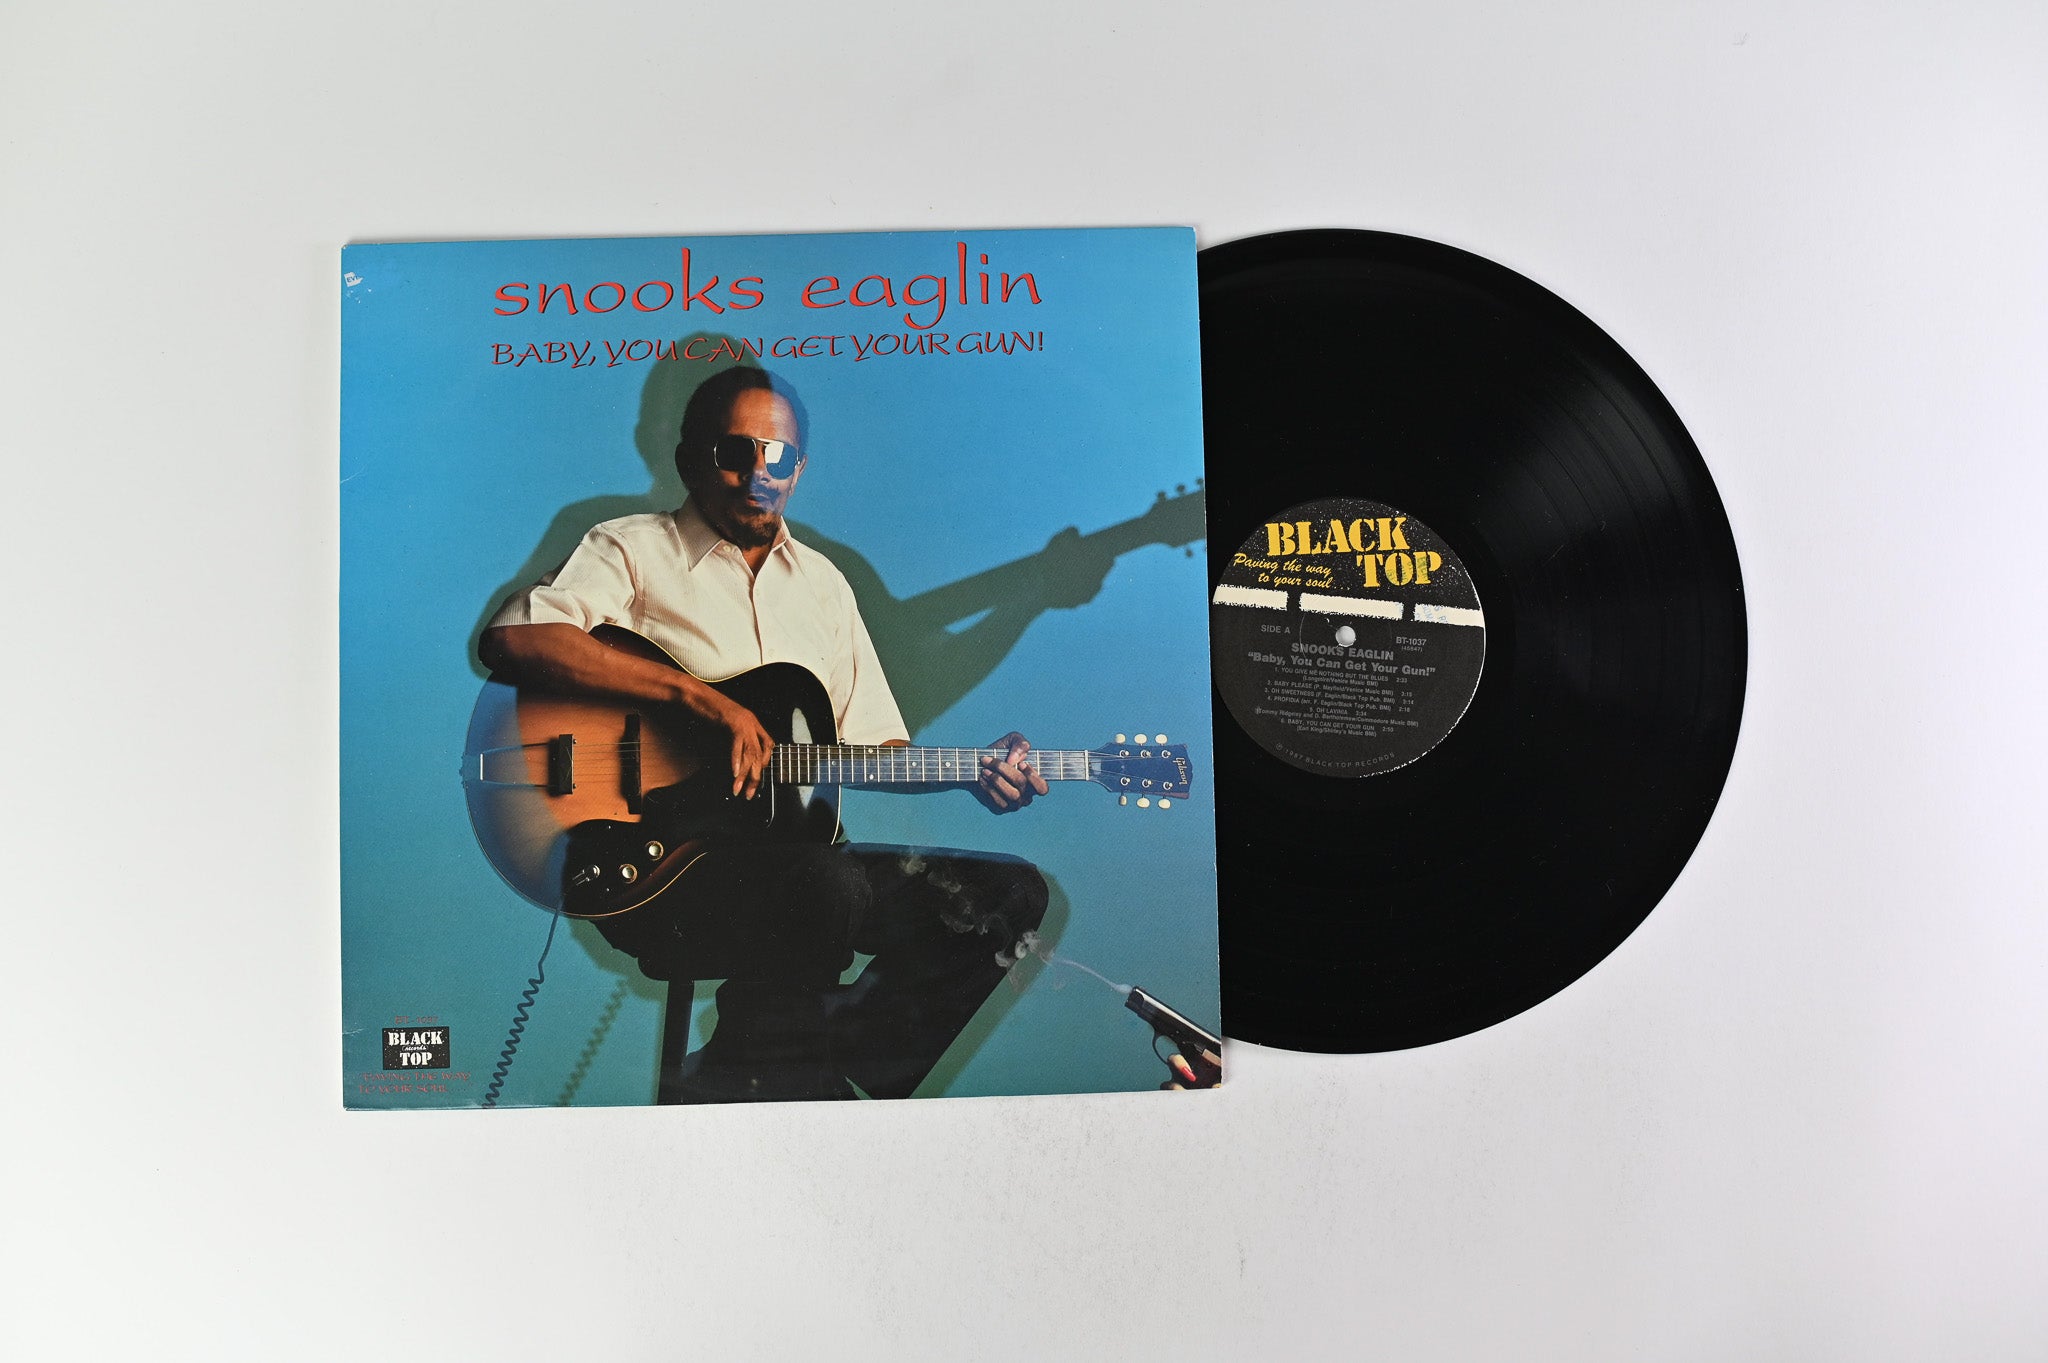 Snooks Eaglin – Baby, You Can Get Your Gun! on Black Top Records